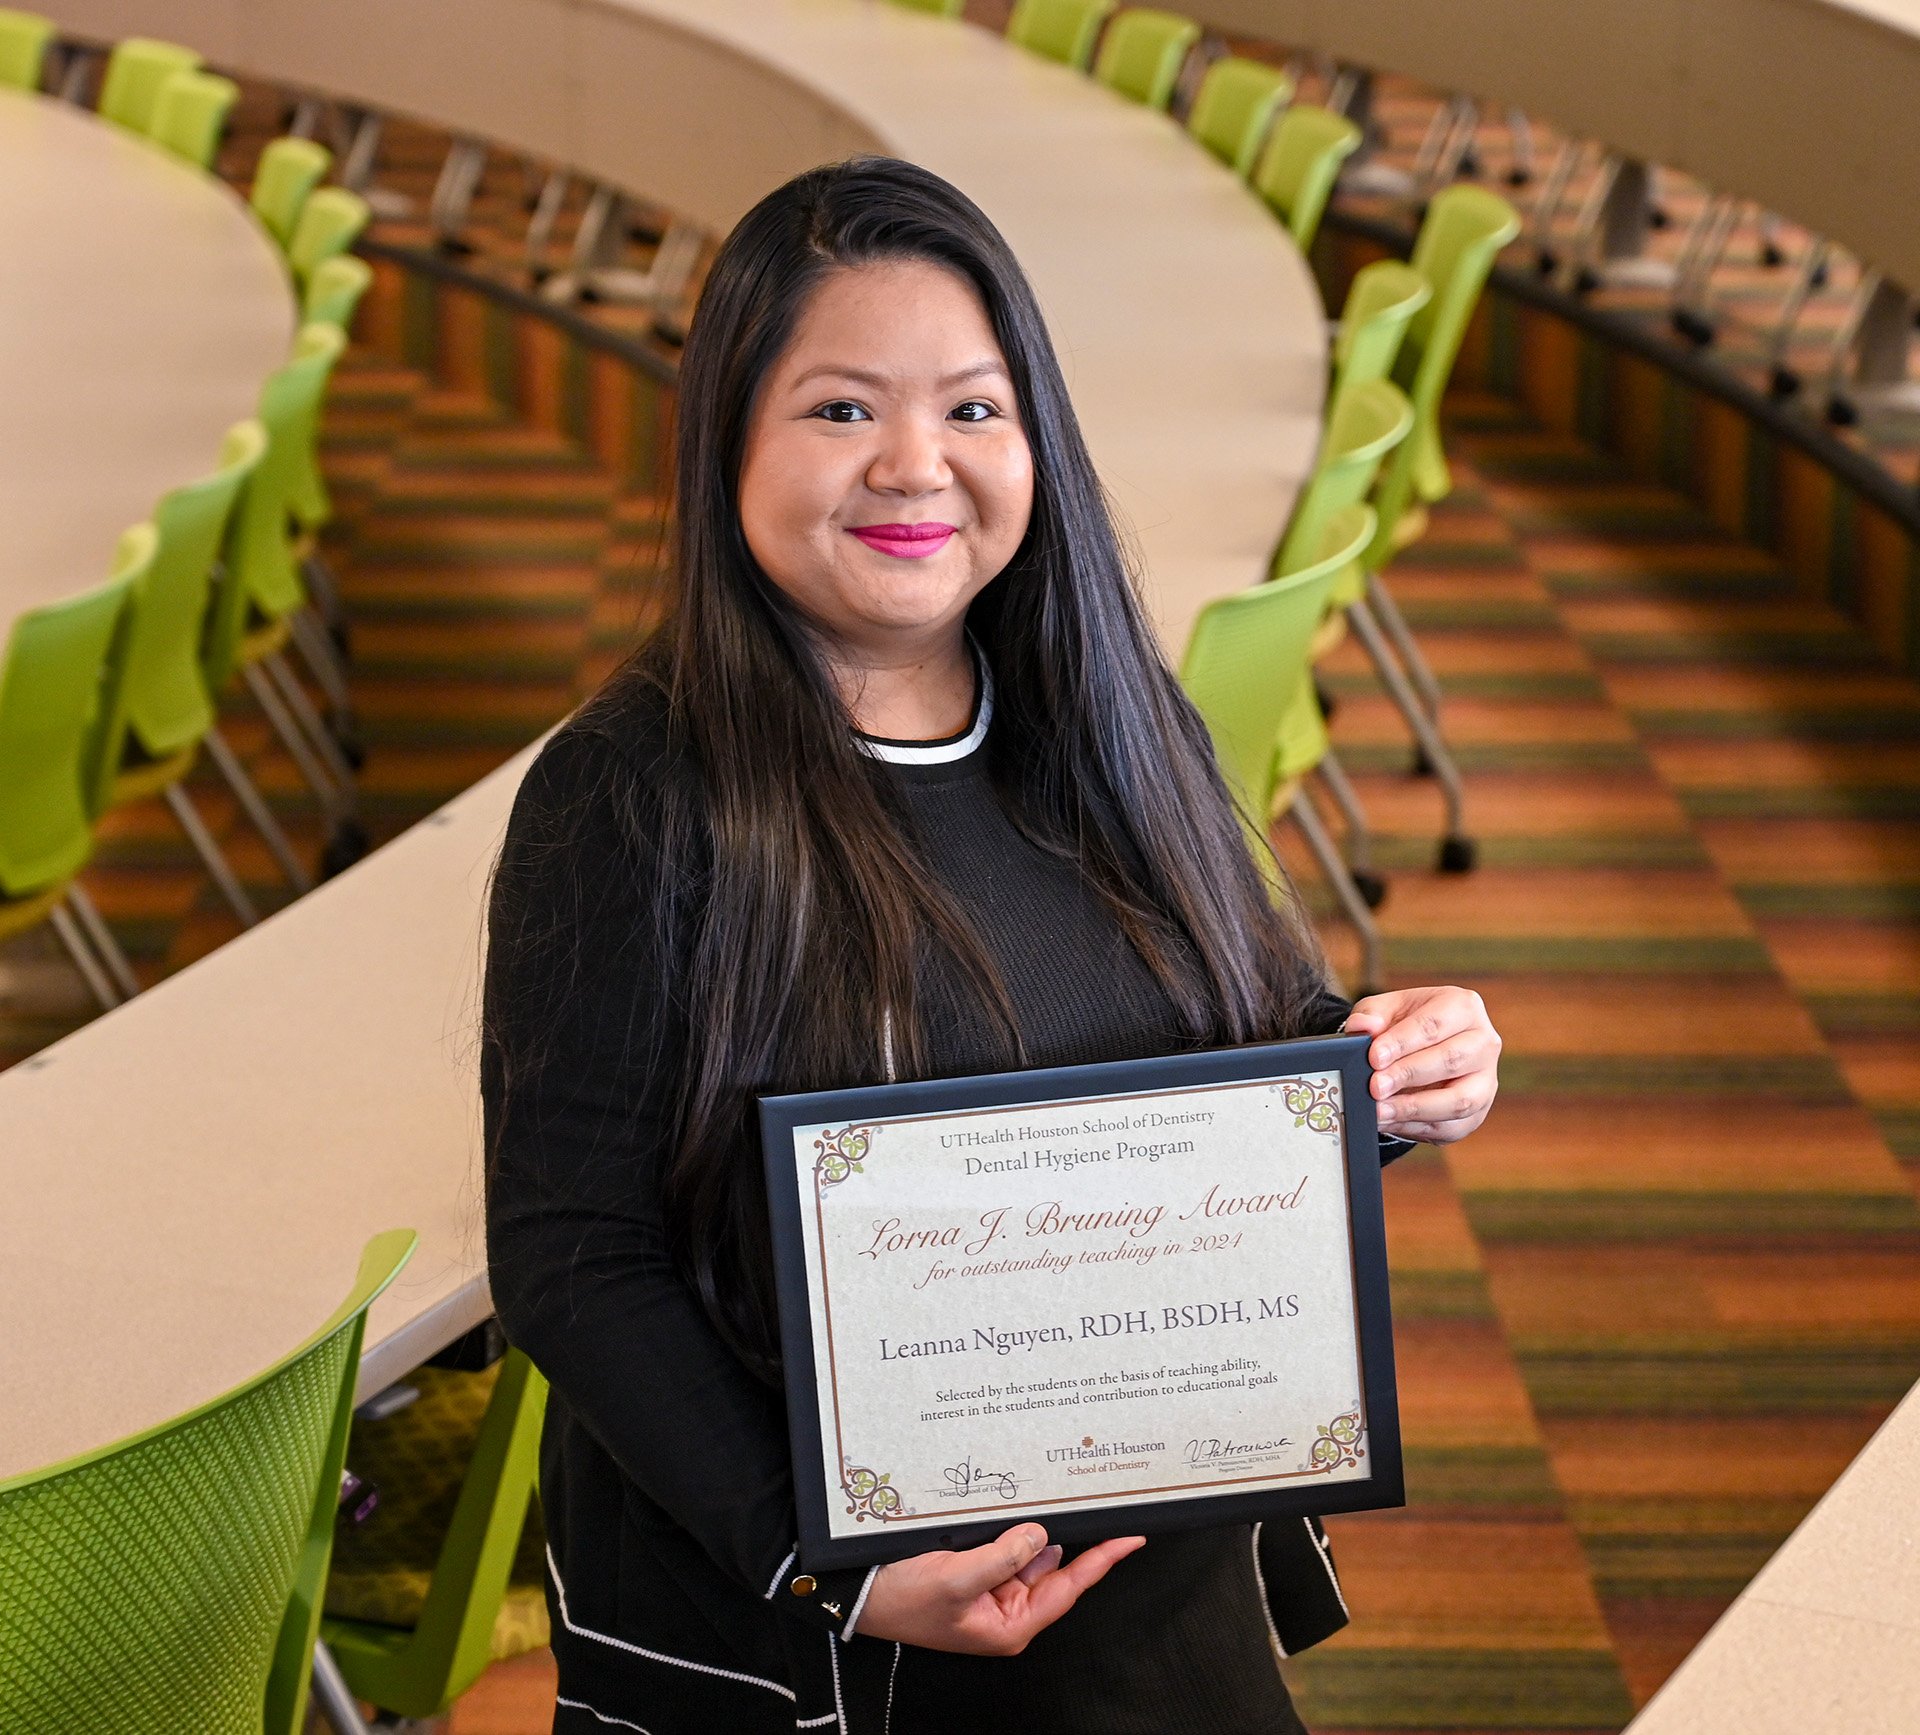 Assistant Professor Leanna Nguyen, RDH, BSDH, MS, holds her certificate for the Lorna J. Bruning Award for Outstanding Teaching.